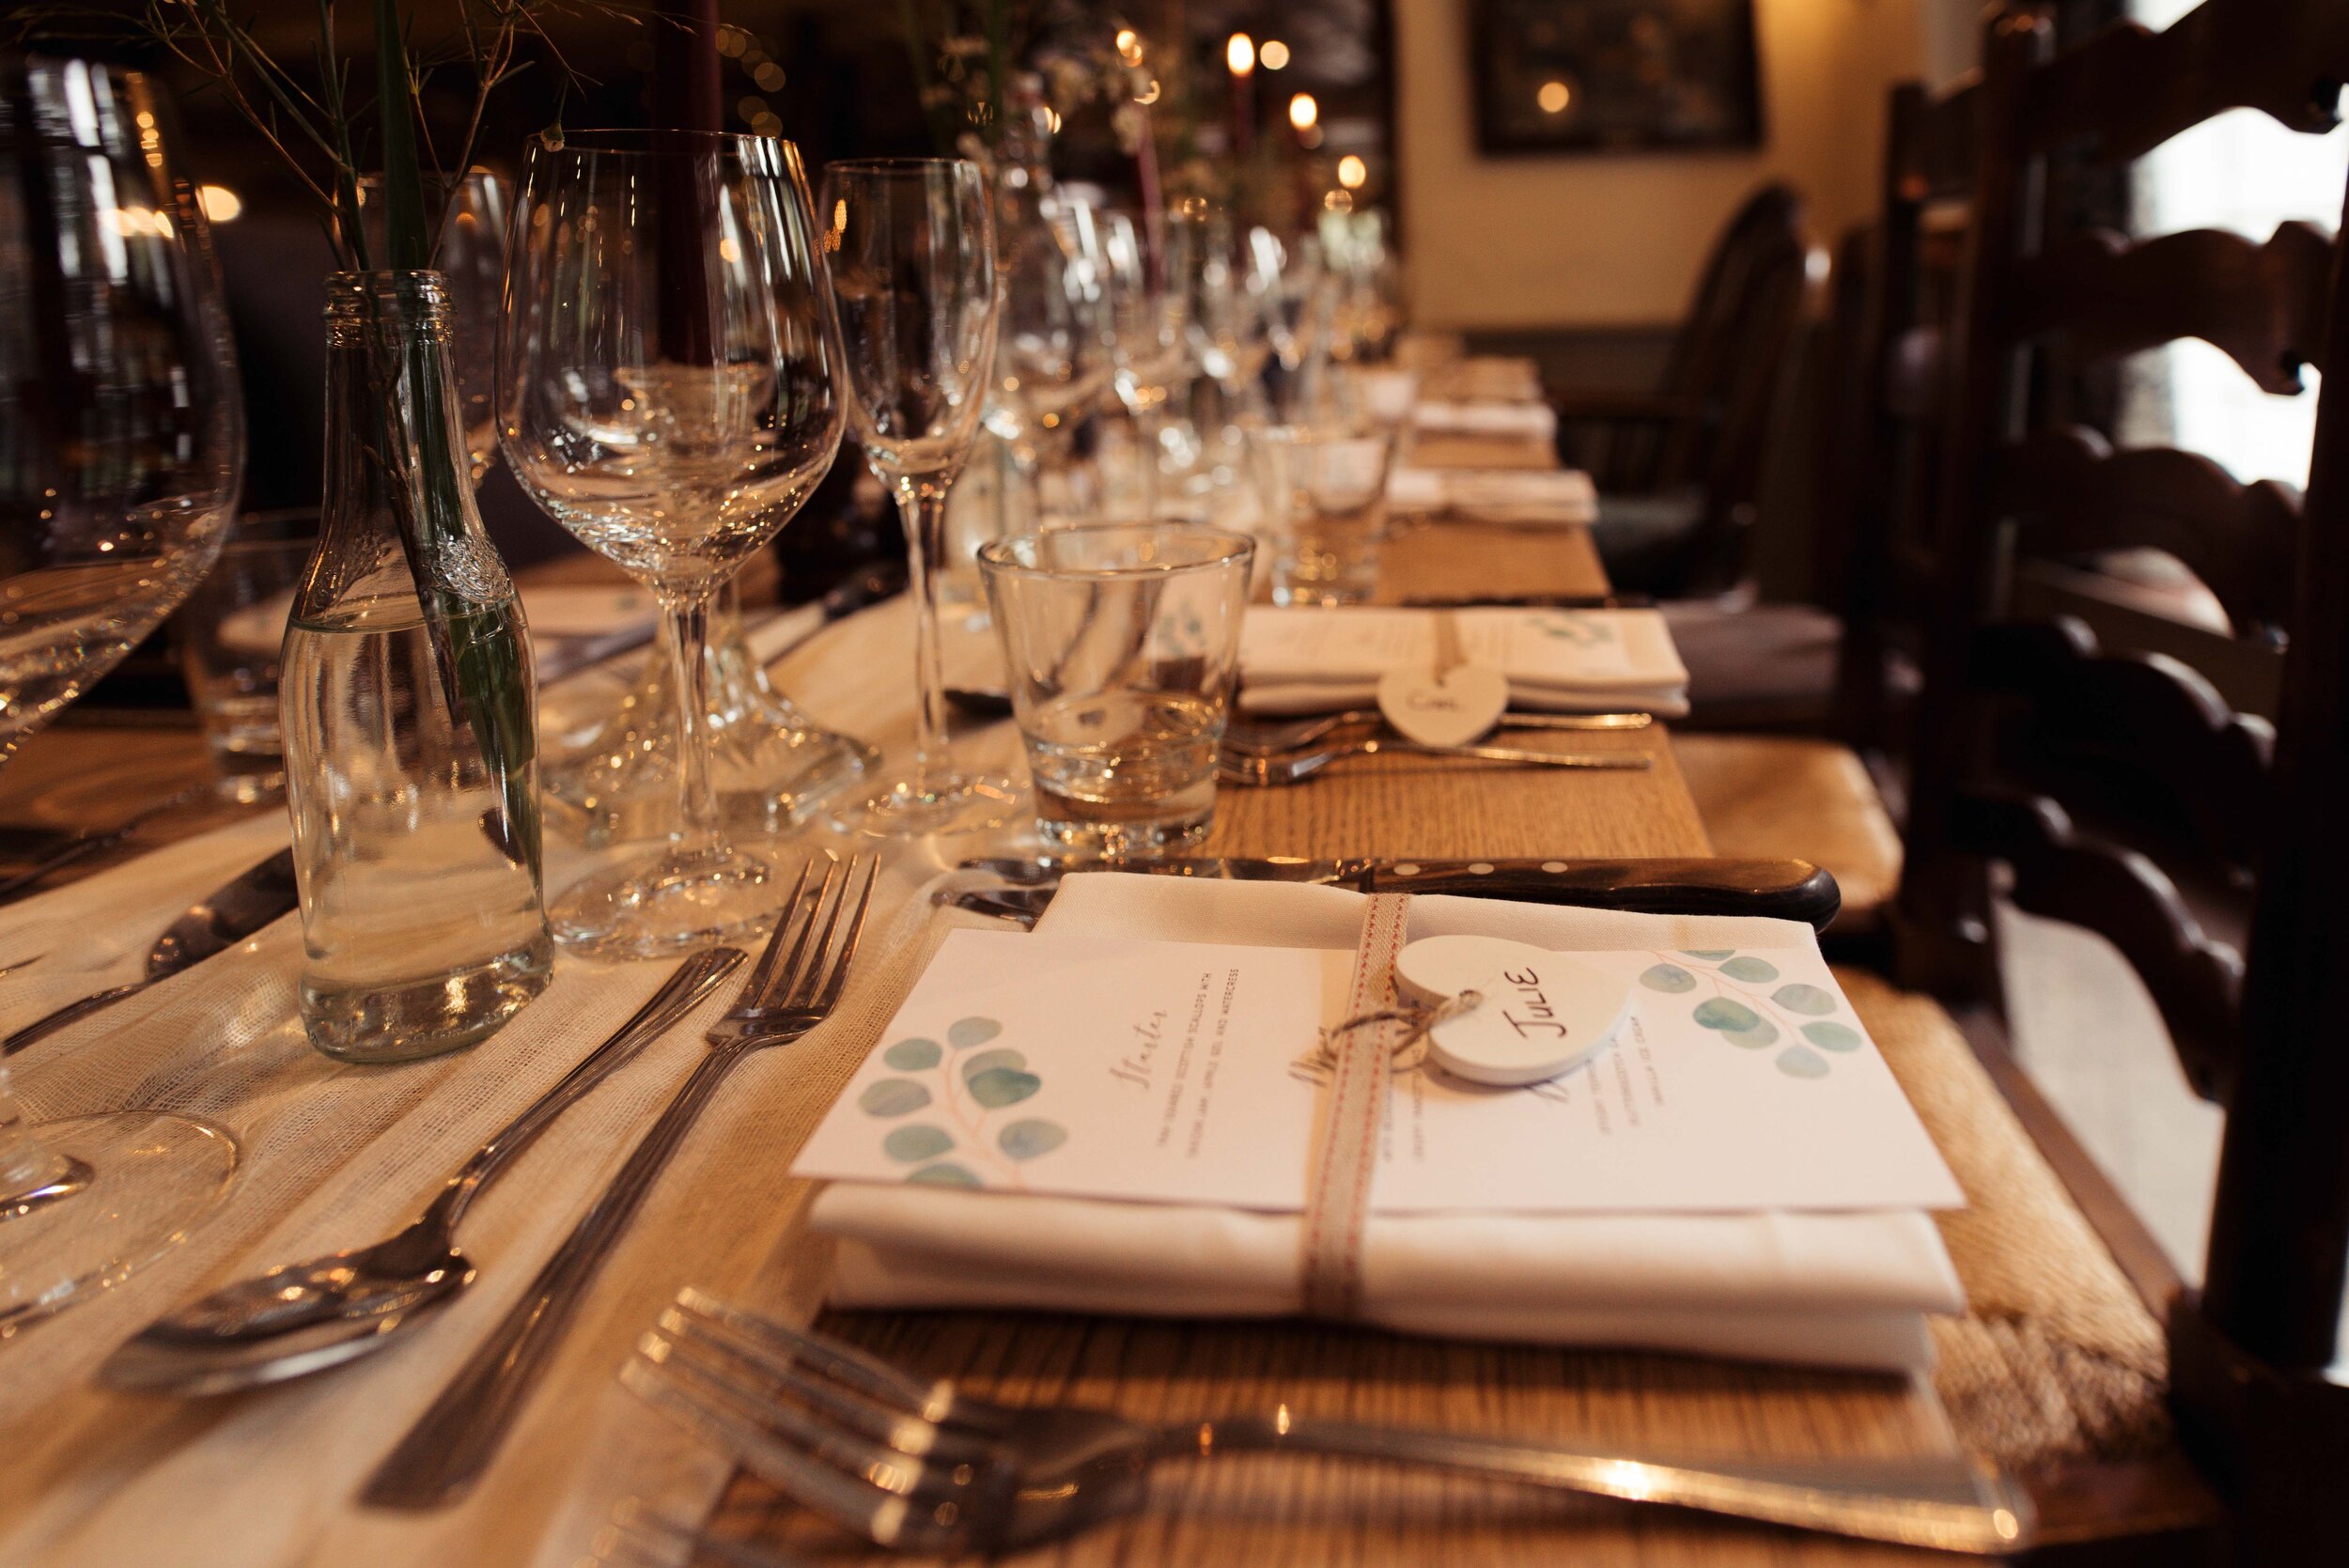 Wedding place settings at the Wild Boar